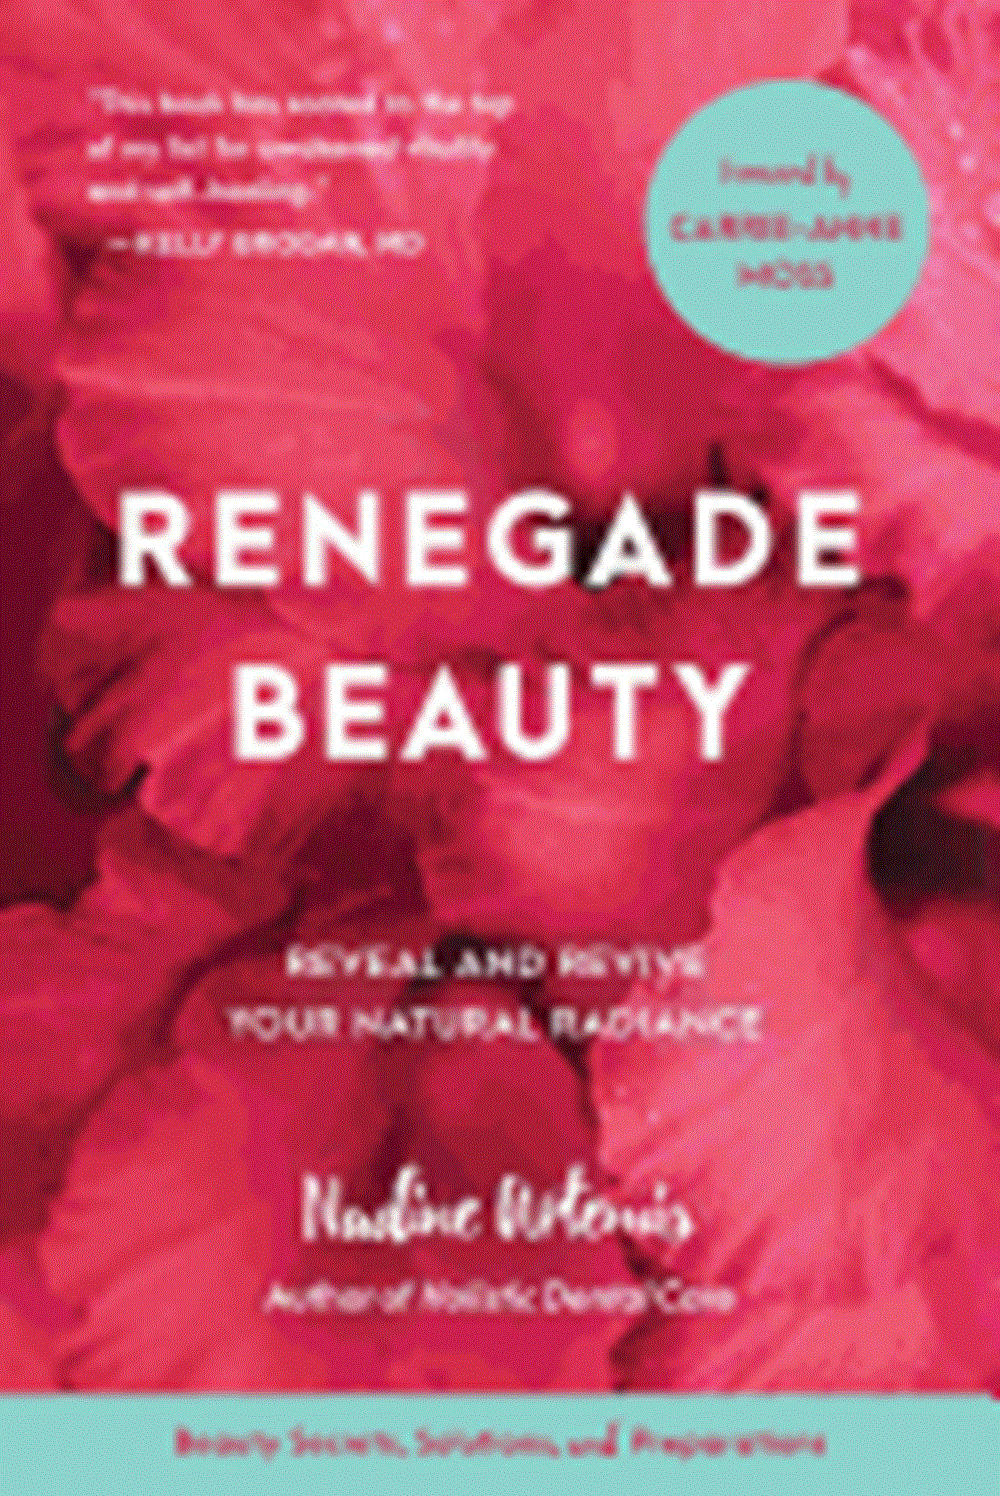 Renegade Beauty: Reveal and Revive Your Natural Radiance--Beauty Secrets, Solutions, and Preparation